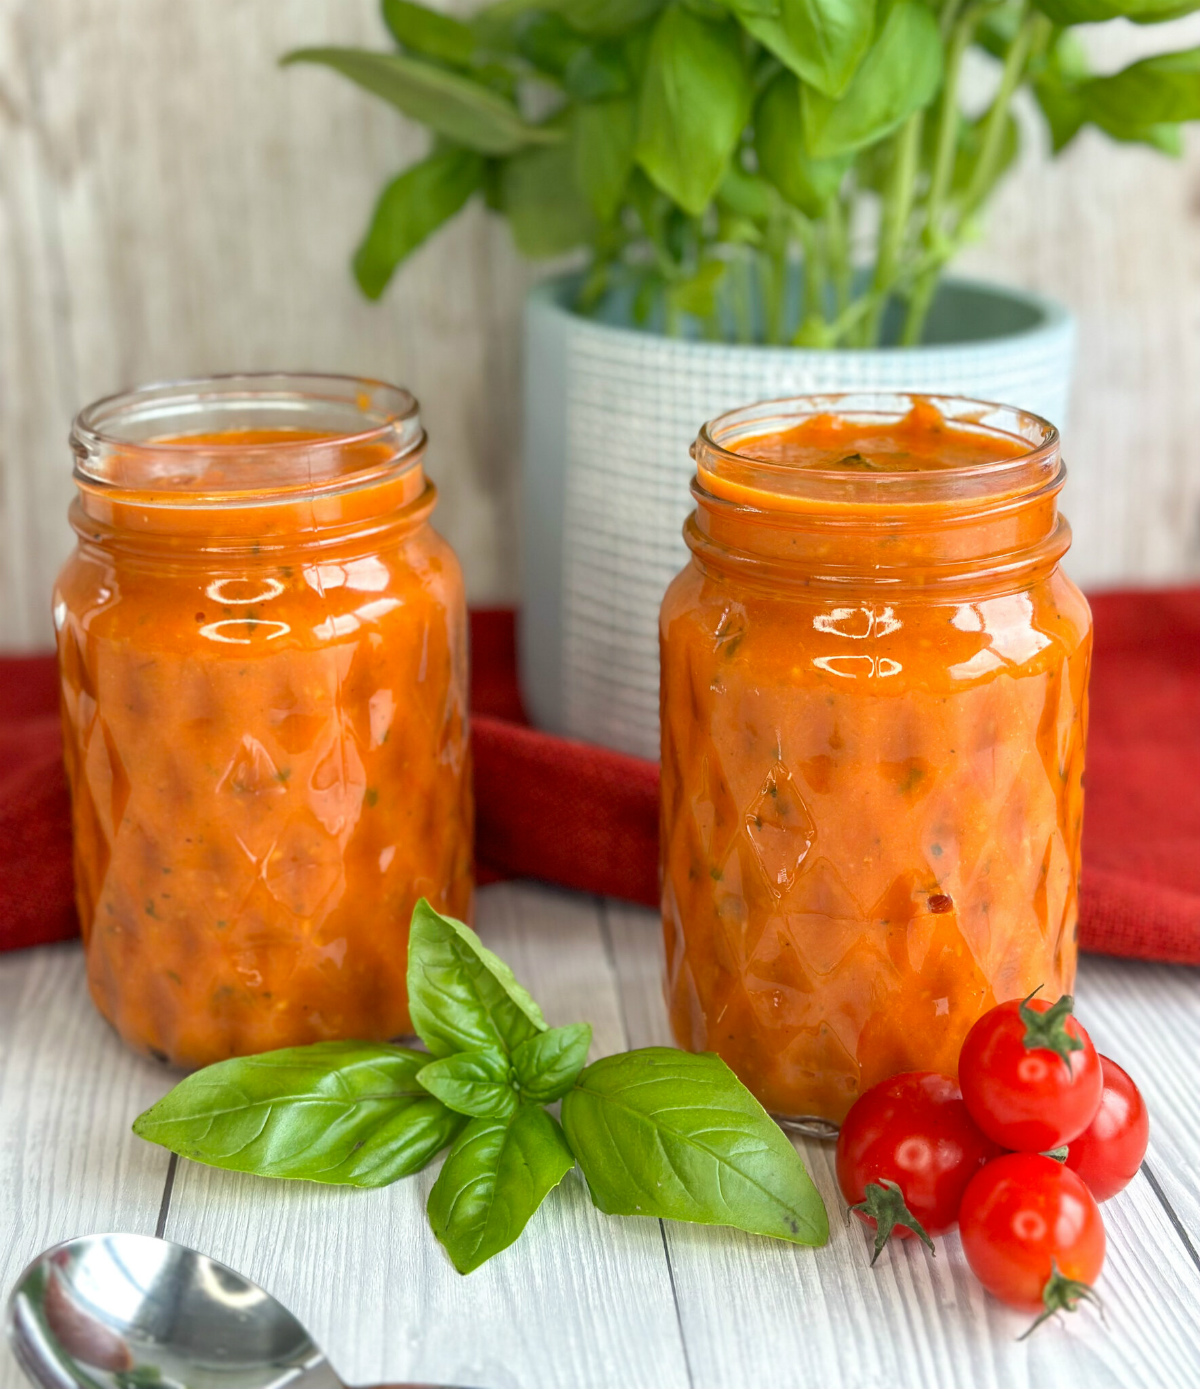 Glass jars filled with homemade pasta sauce - cherry tomato and basil slow cooker pasta sauce 